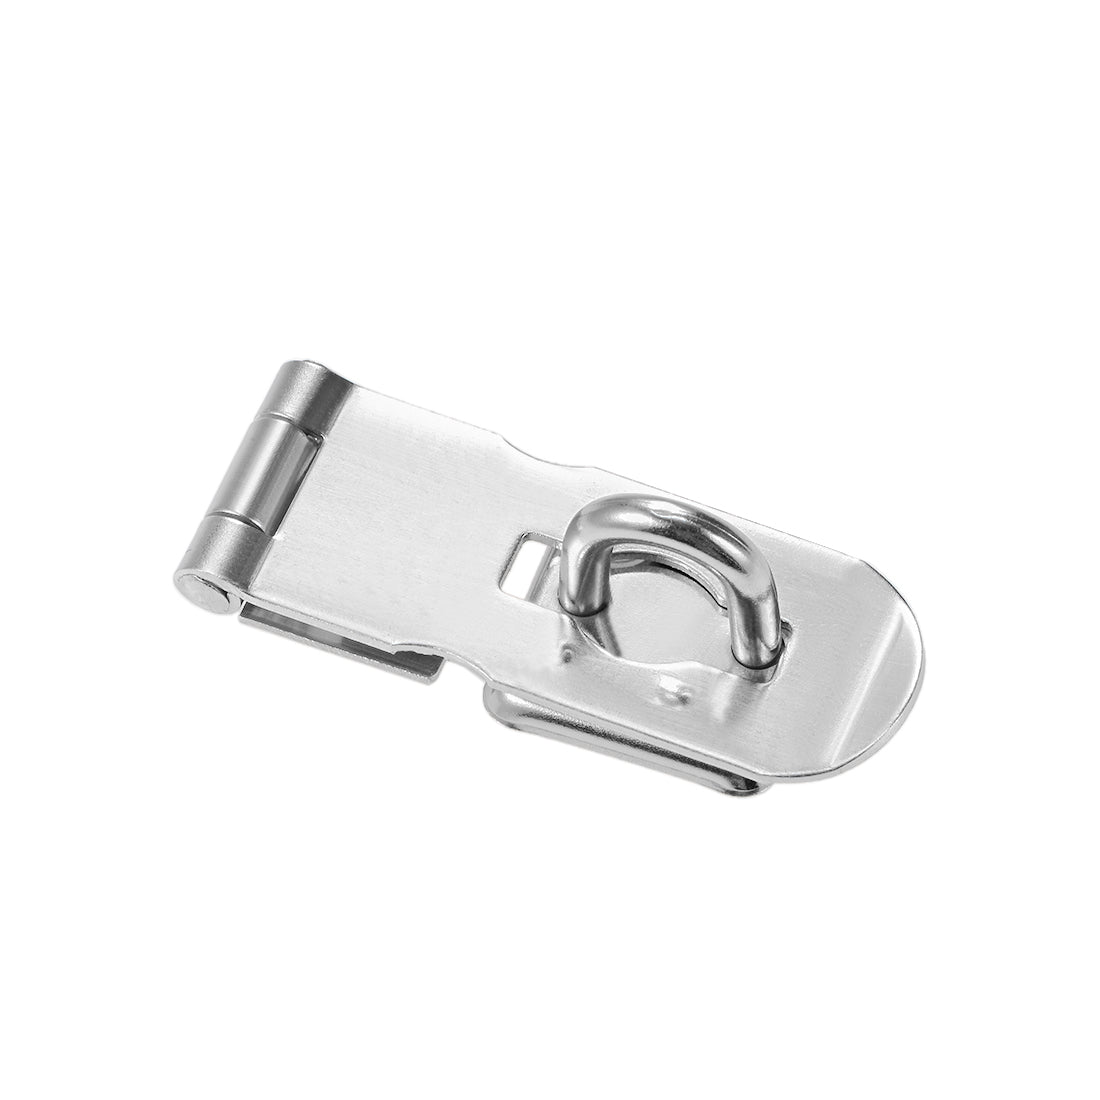 uxcell Uxcell Padlock Hasp Door Clasp Hasp Latch Security Safety Bolt Lock Latches 3-inch Stainless Steel